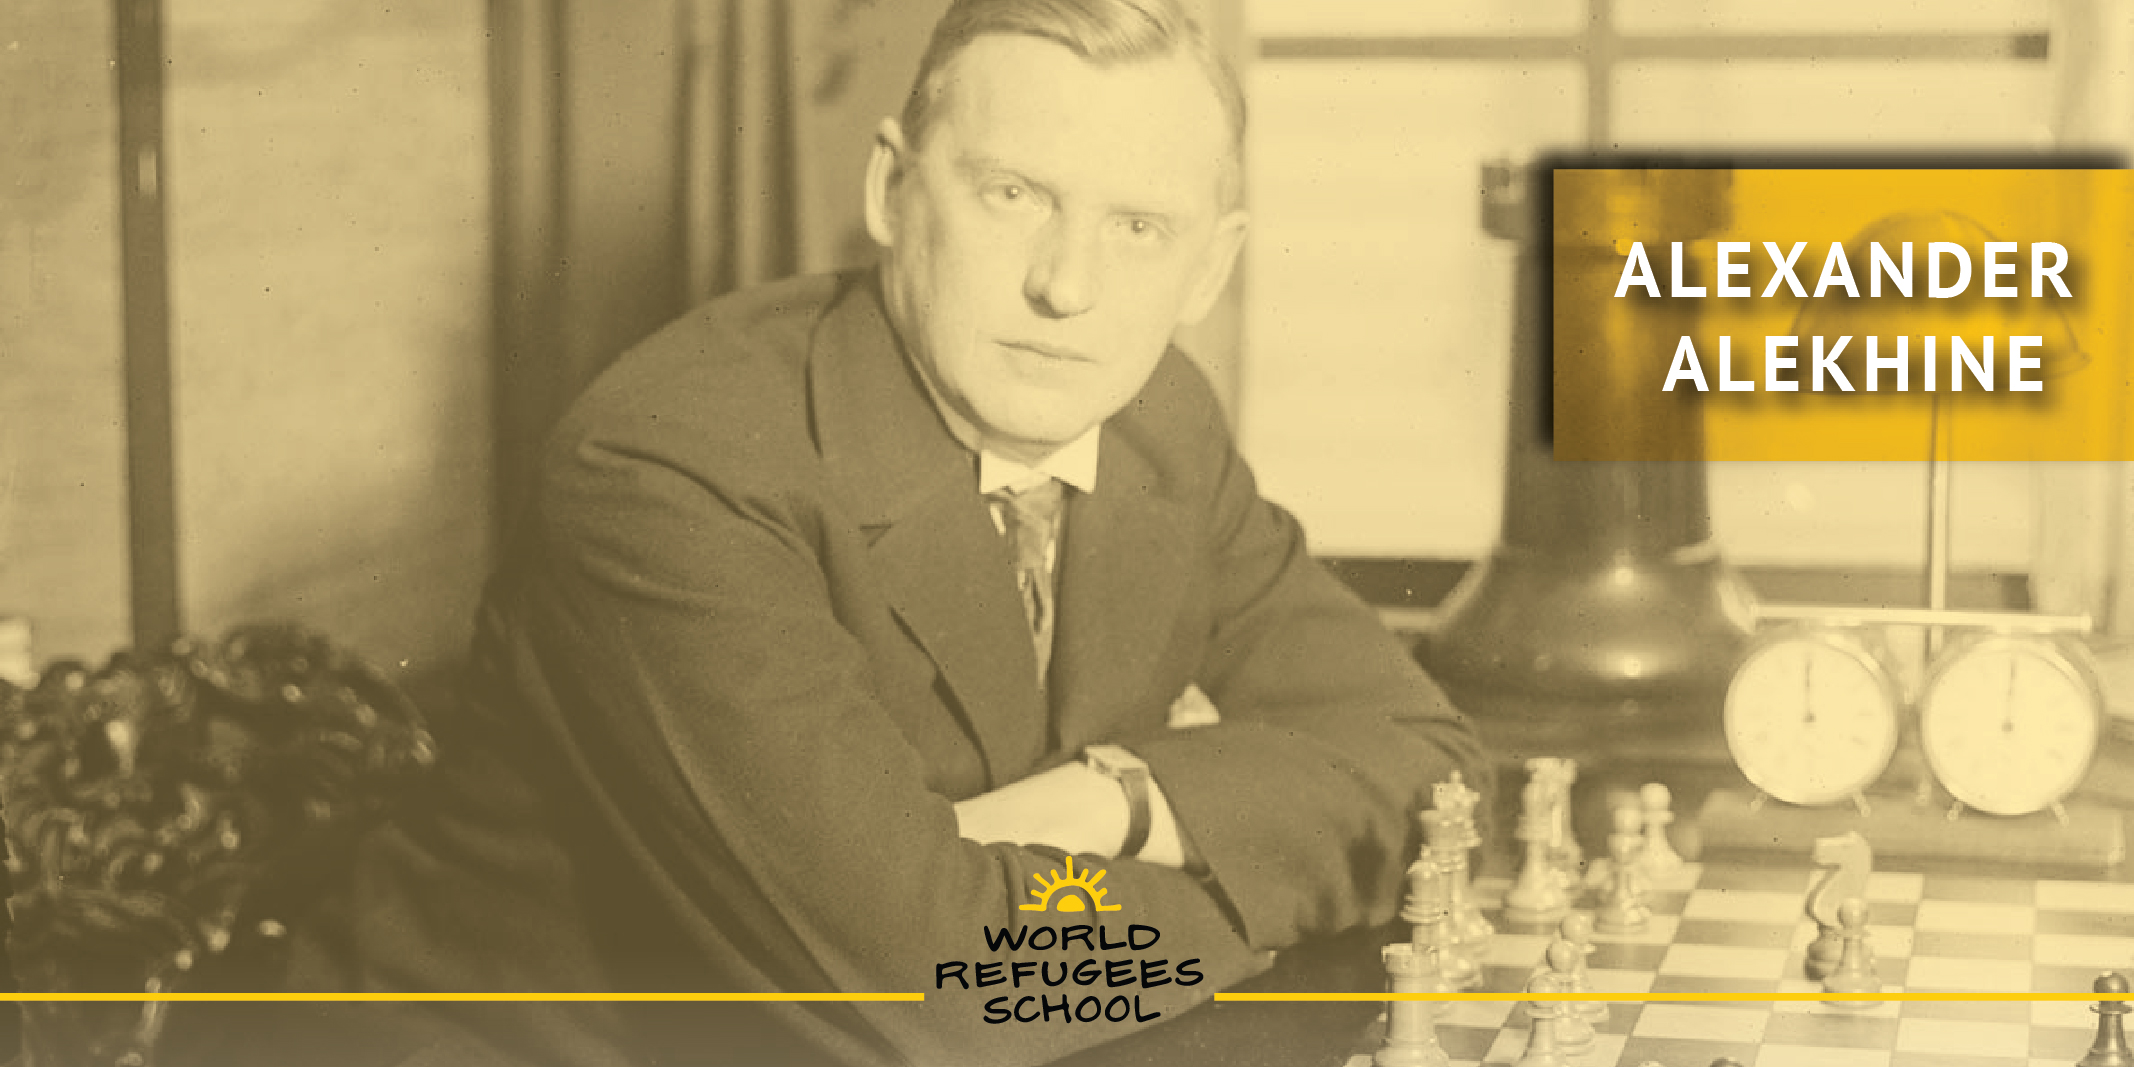 Why have some chess greats suggested that Alexander Alekhine was